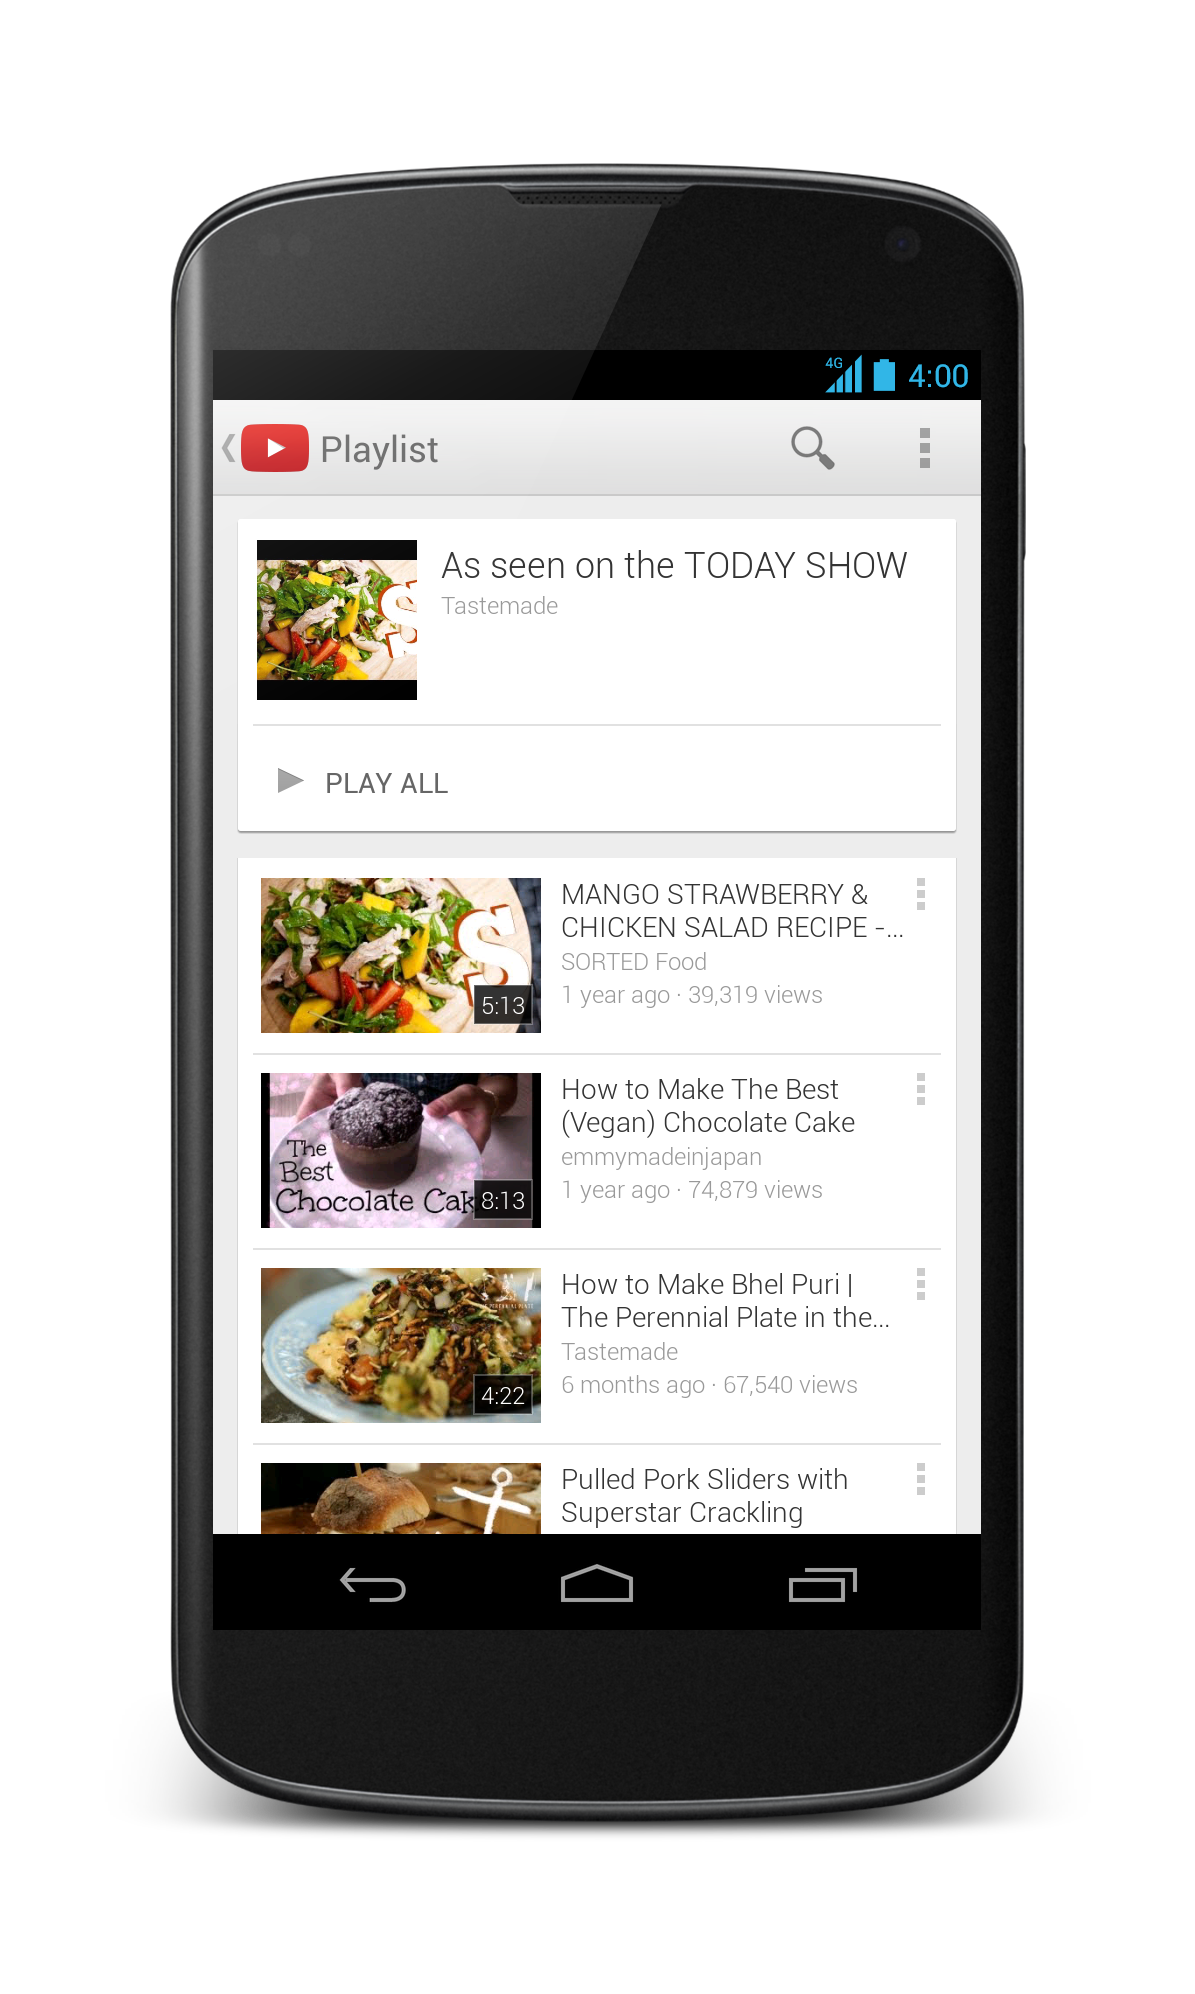 YouTube’s Getting A Fantastic, Functional Makeover On Android